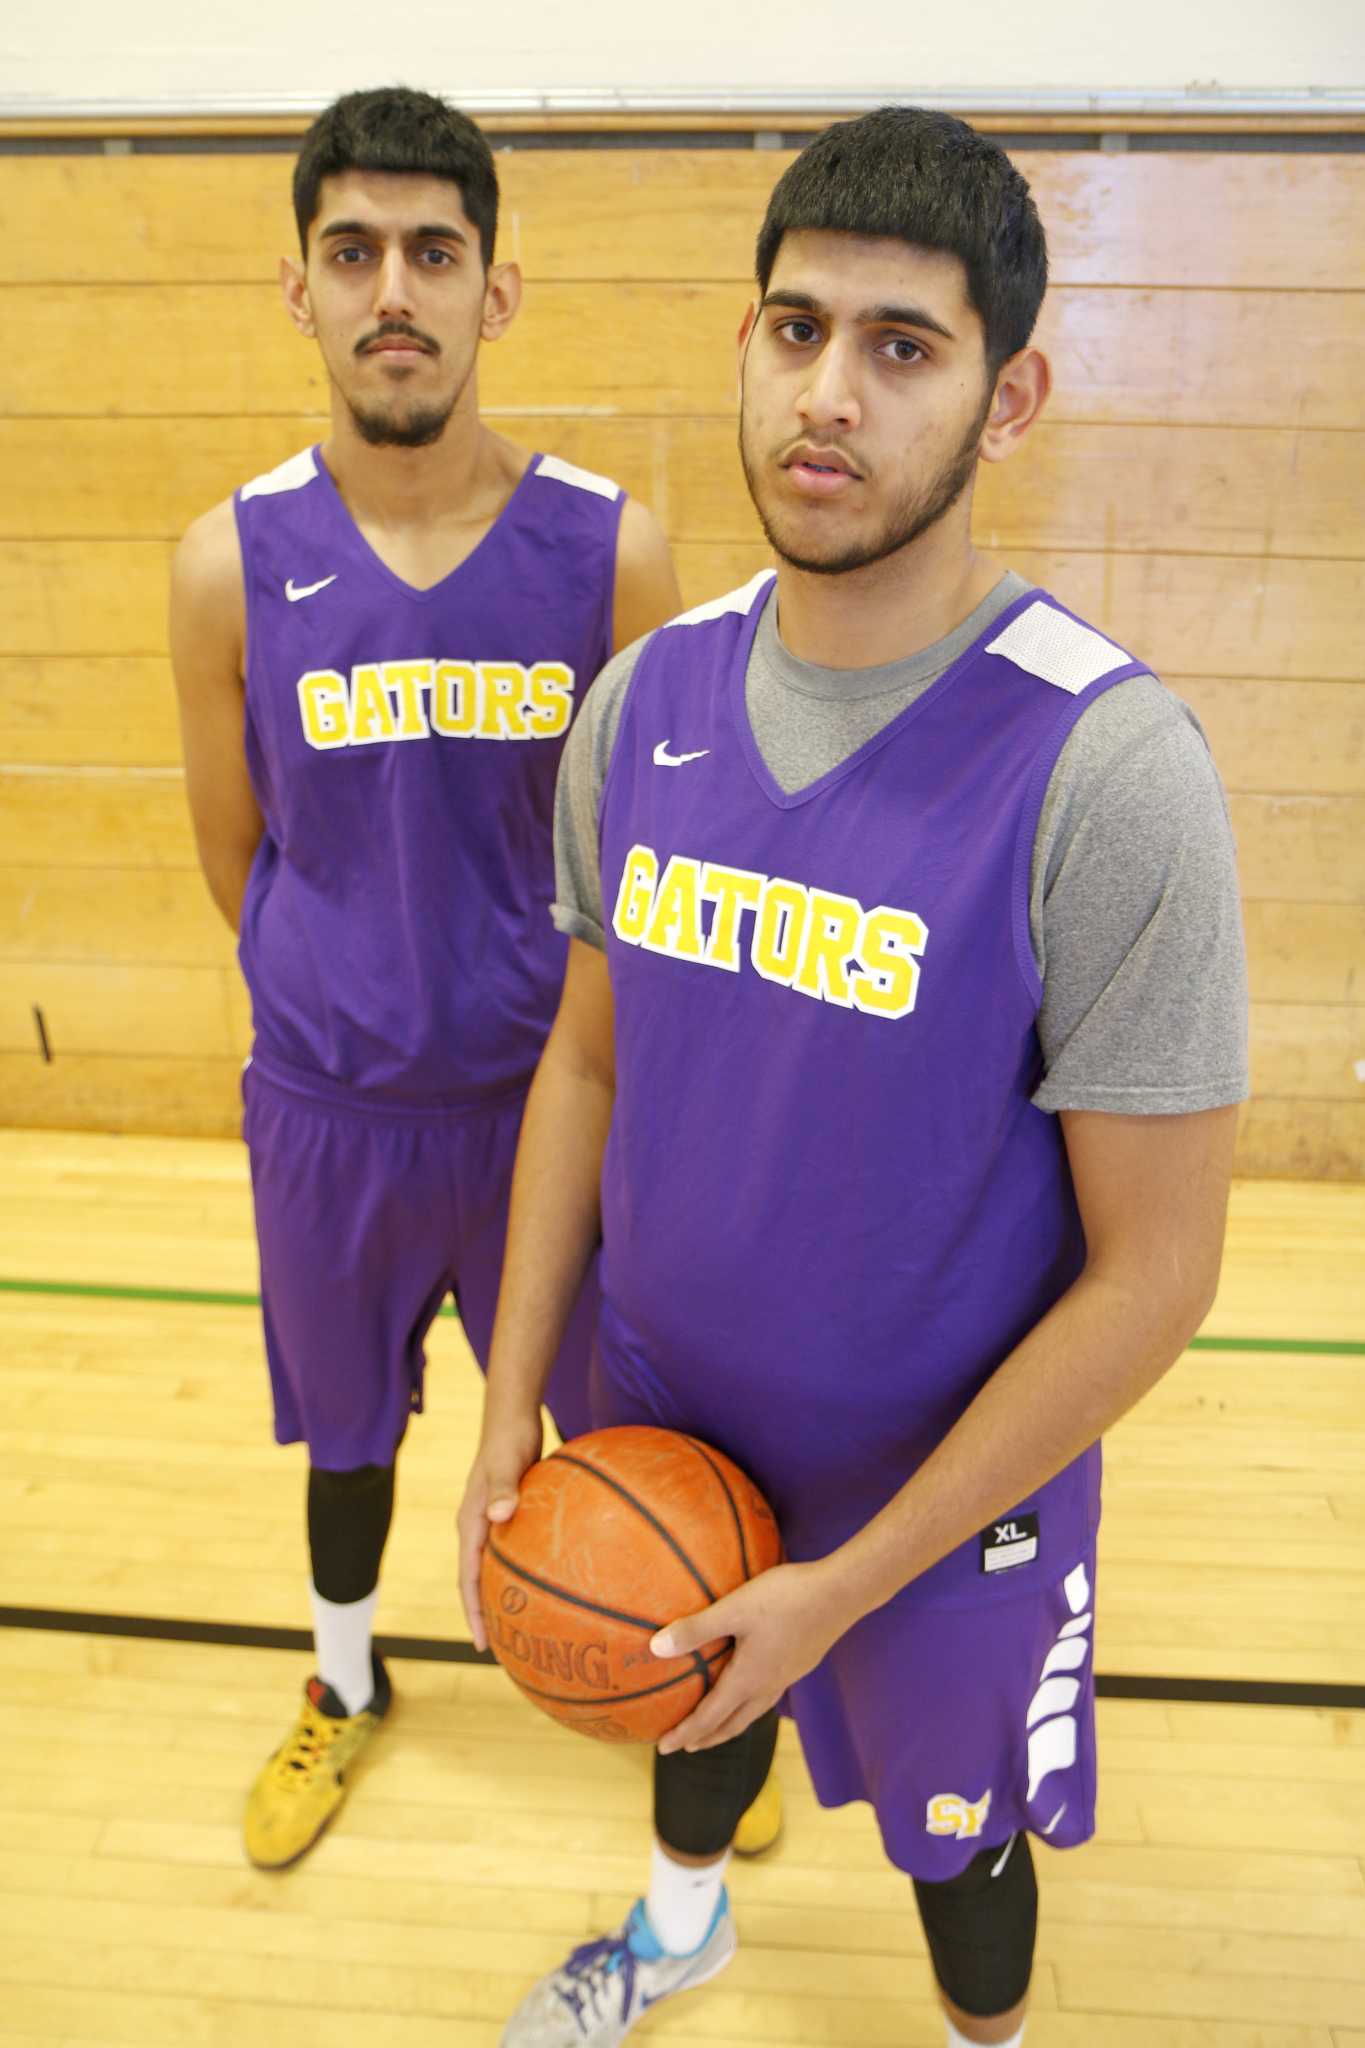 SF State Gator men’s basketball players AJ and Jash Kahlon pose for a portrait in the practice GYM on Tuesday, Nov. 29, 2016. This season will make the first time the Kahlon brothers have played together.